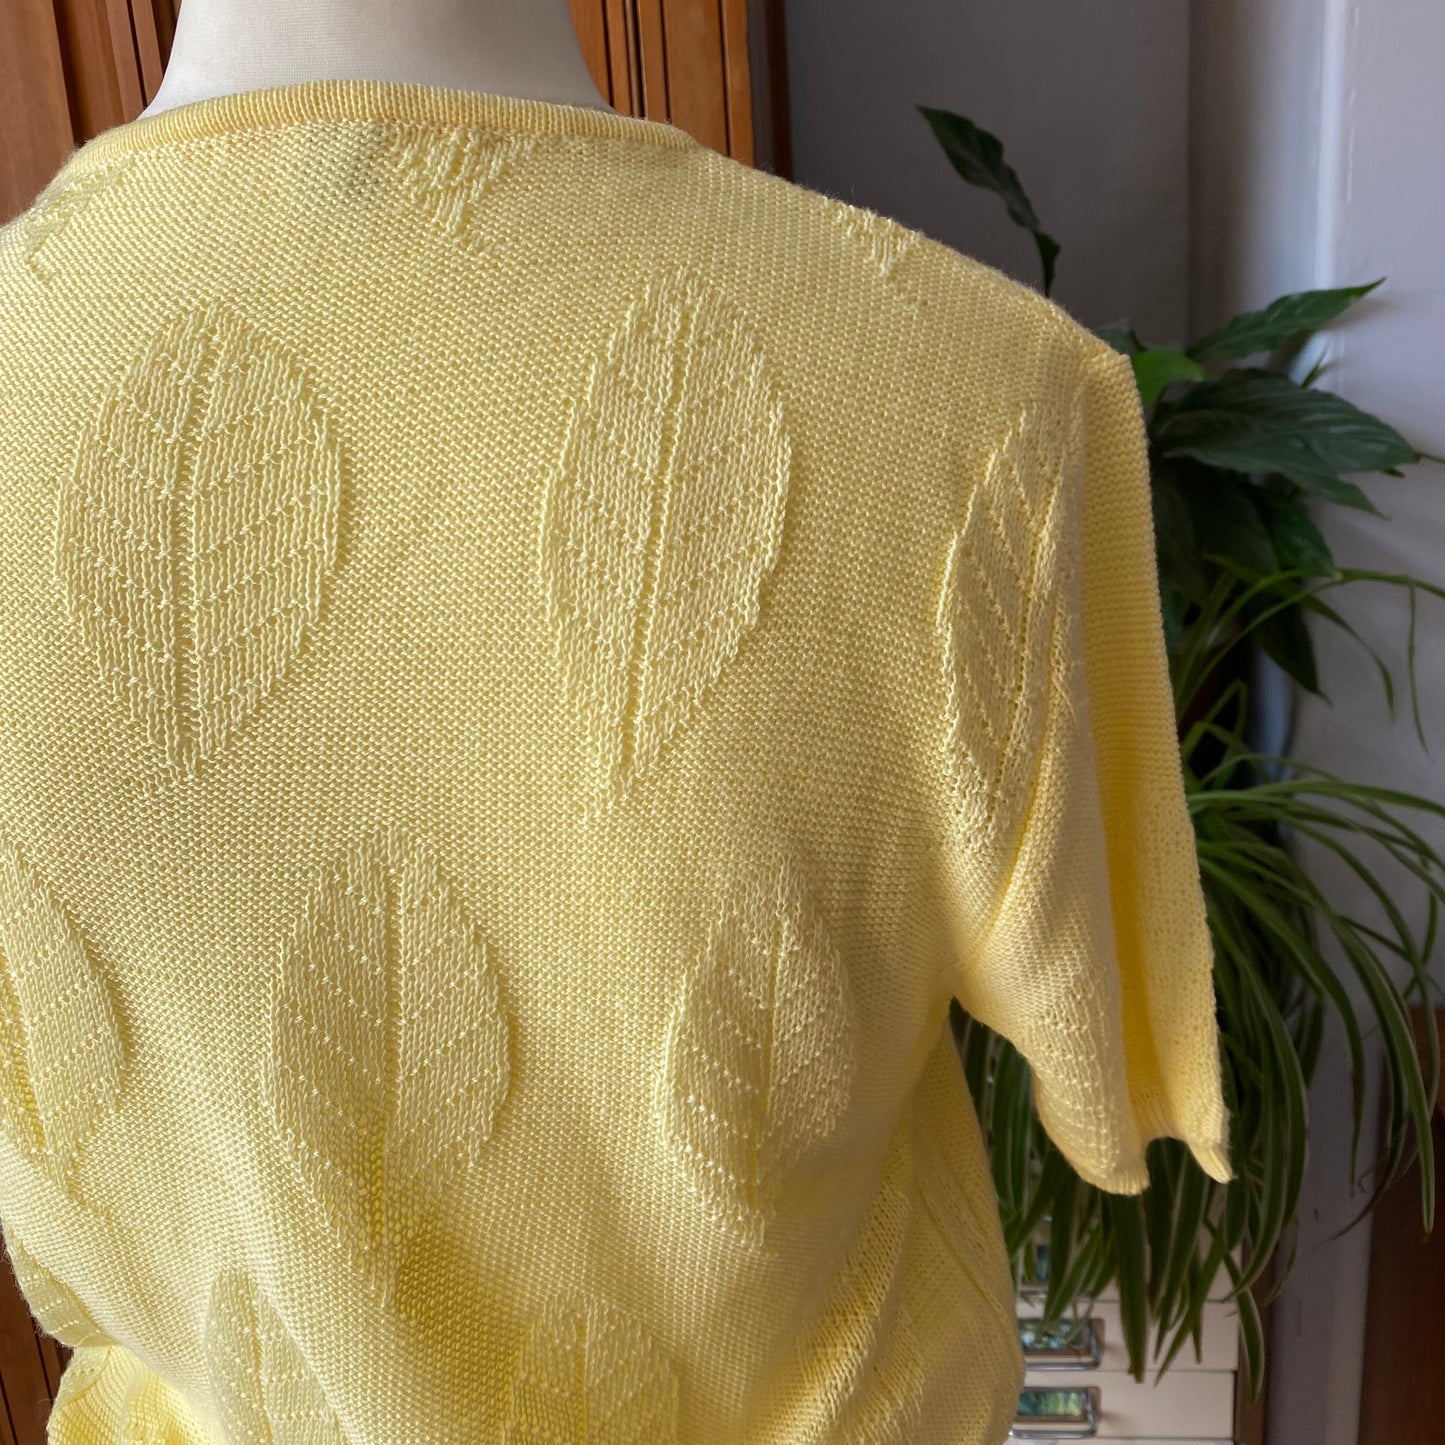 80s short sleeved lightweight, yellow knitted top/ jumper . Approx UK size 10-14